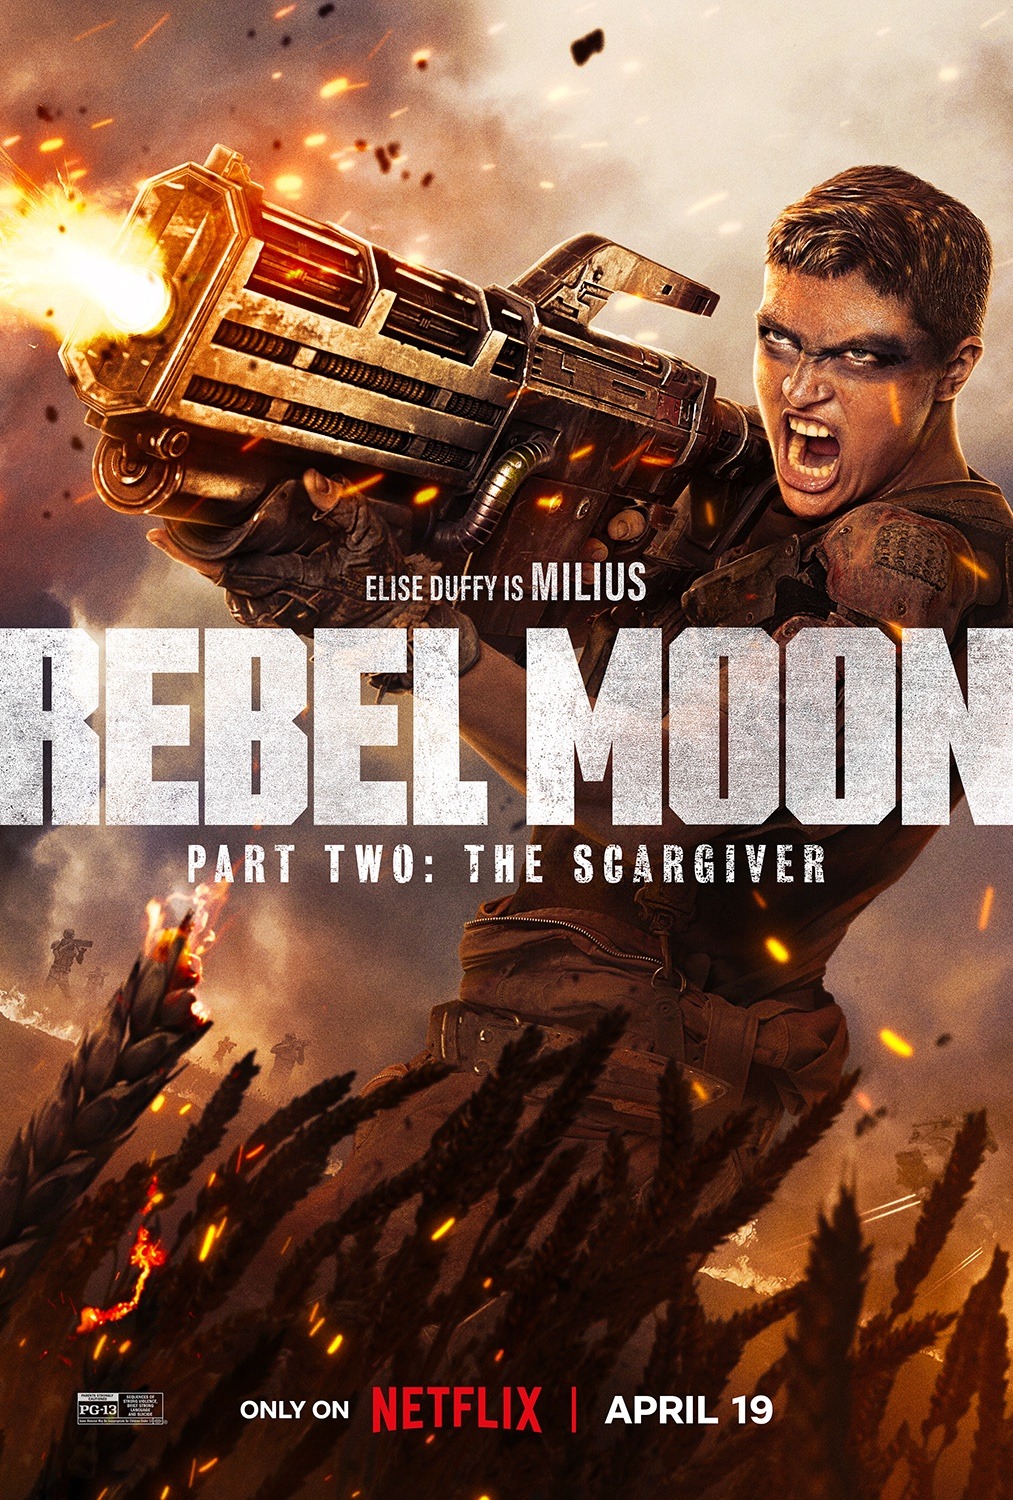 Extra Large Movie Poster Image for Rebel Moon - Part Two: The Scargiver (#9 of 14)